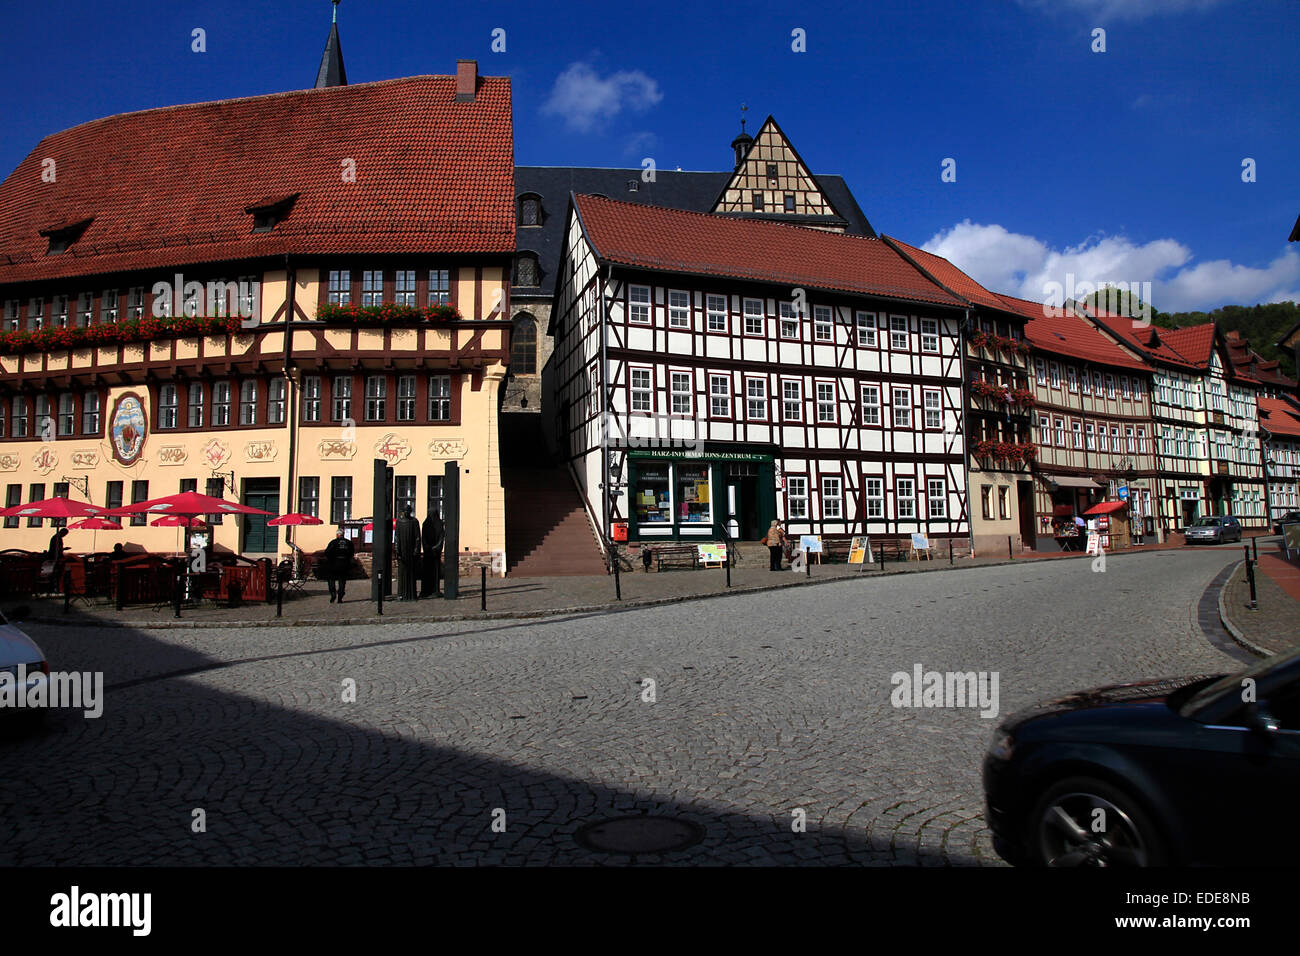 The town hall on the market place of Stolberg was built in the late Middle Age. It has no stairs inside. Access to the upper floors is only possible via the outside staircase following on the mountainside. Photo: Klaus Nowottnick Date: September 17, 2012 Stock Photo